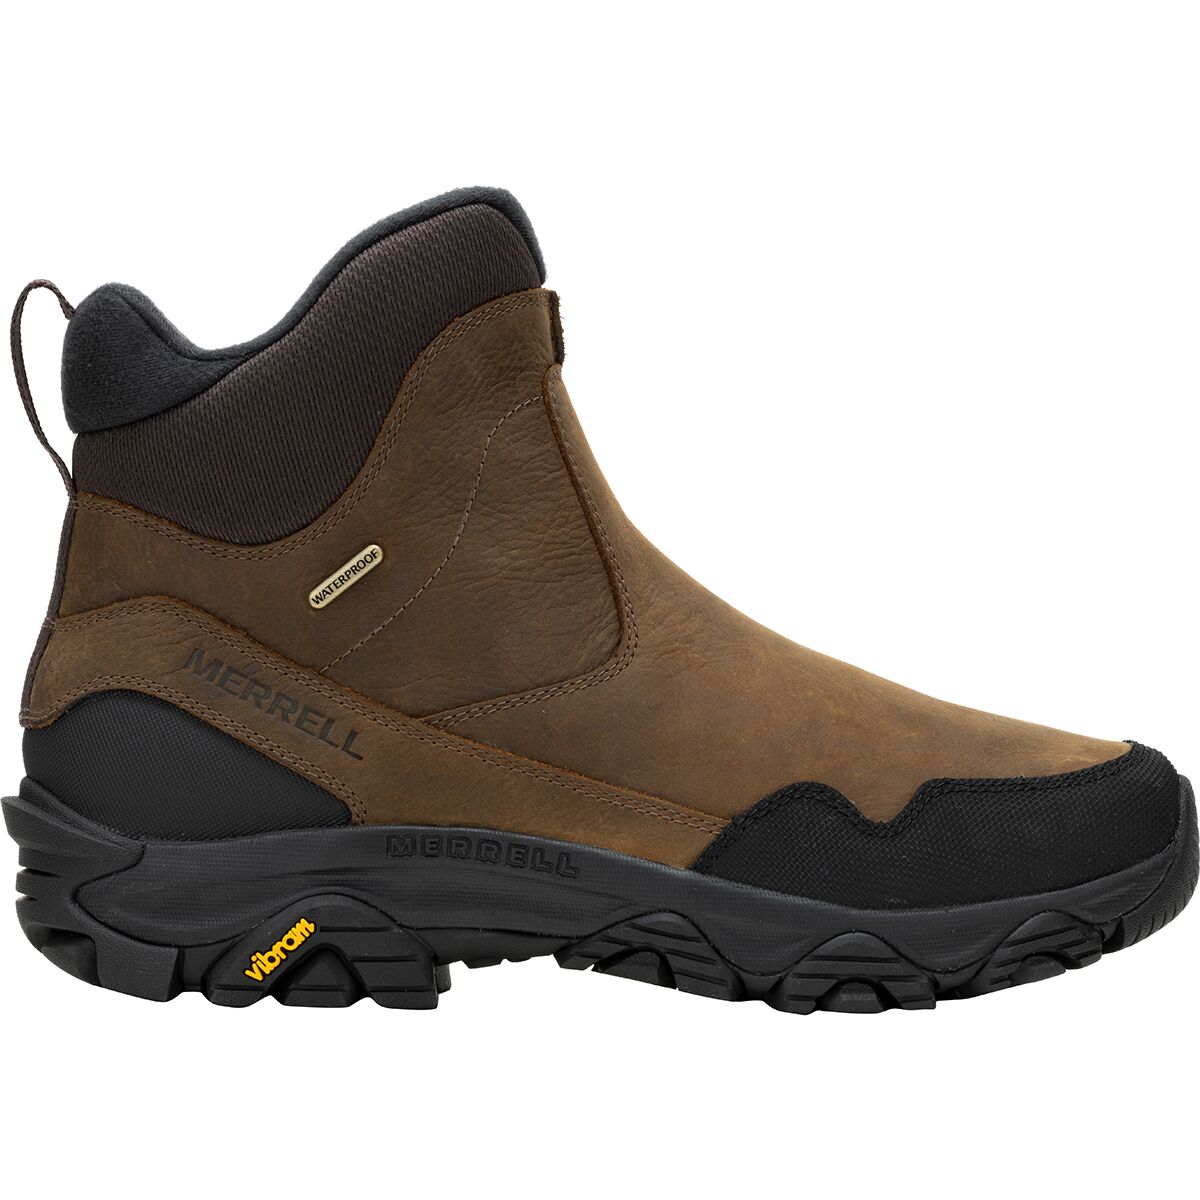 Coldpack 3 Thermo Tall Zip WP Boot - Men